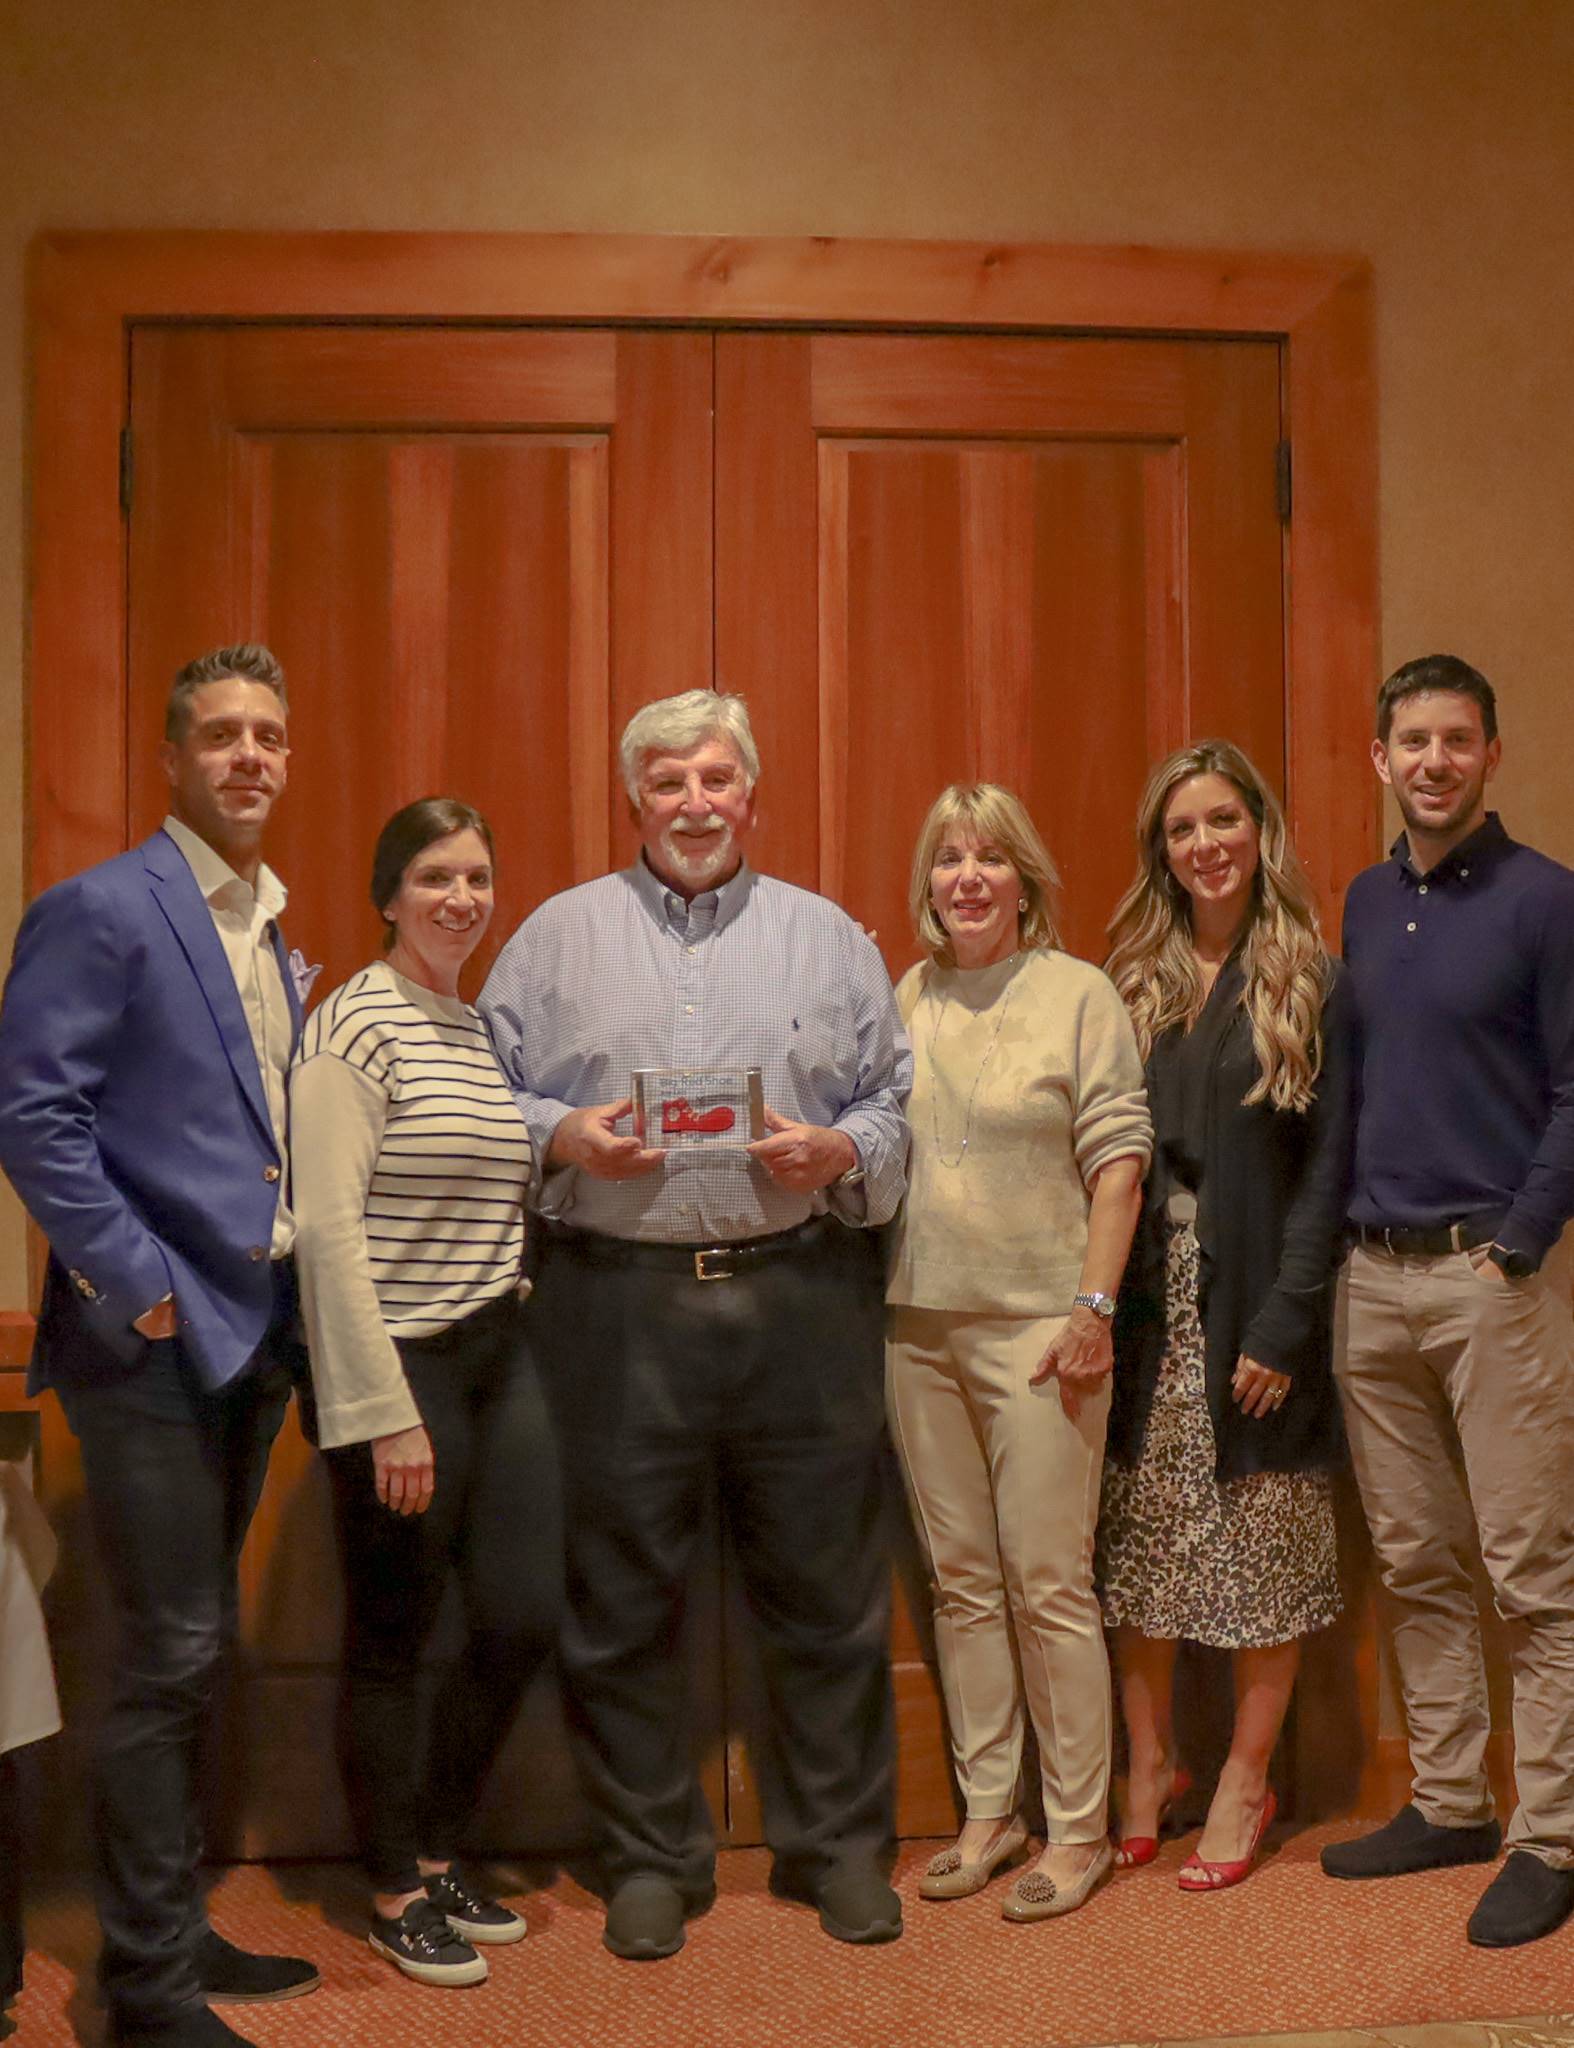 The Lamson family joined Scott as he was honored with the Big Red Shoe Award. Alongside him are his wife, Karen Lamson (nearest right), Greg Sinigiani (far left), current RMHC board member, and siblings.